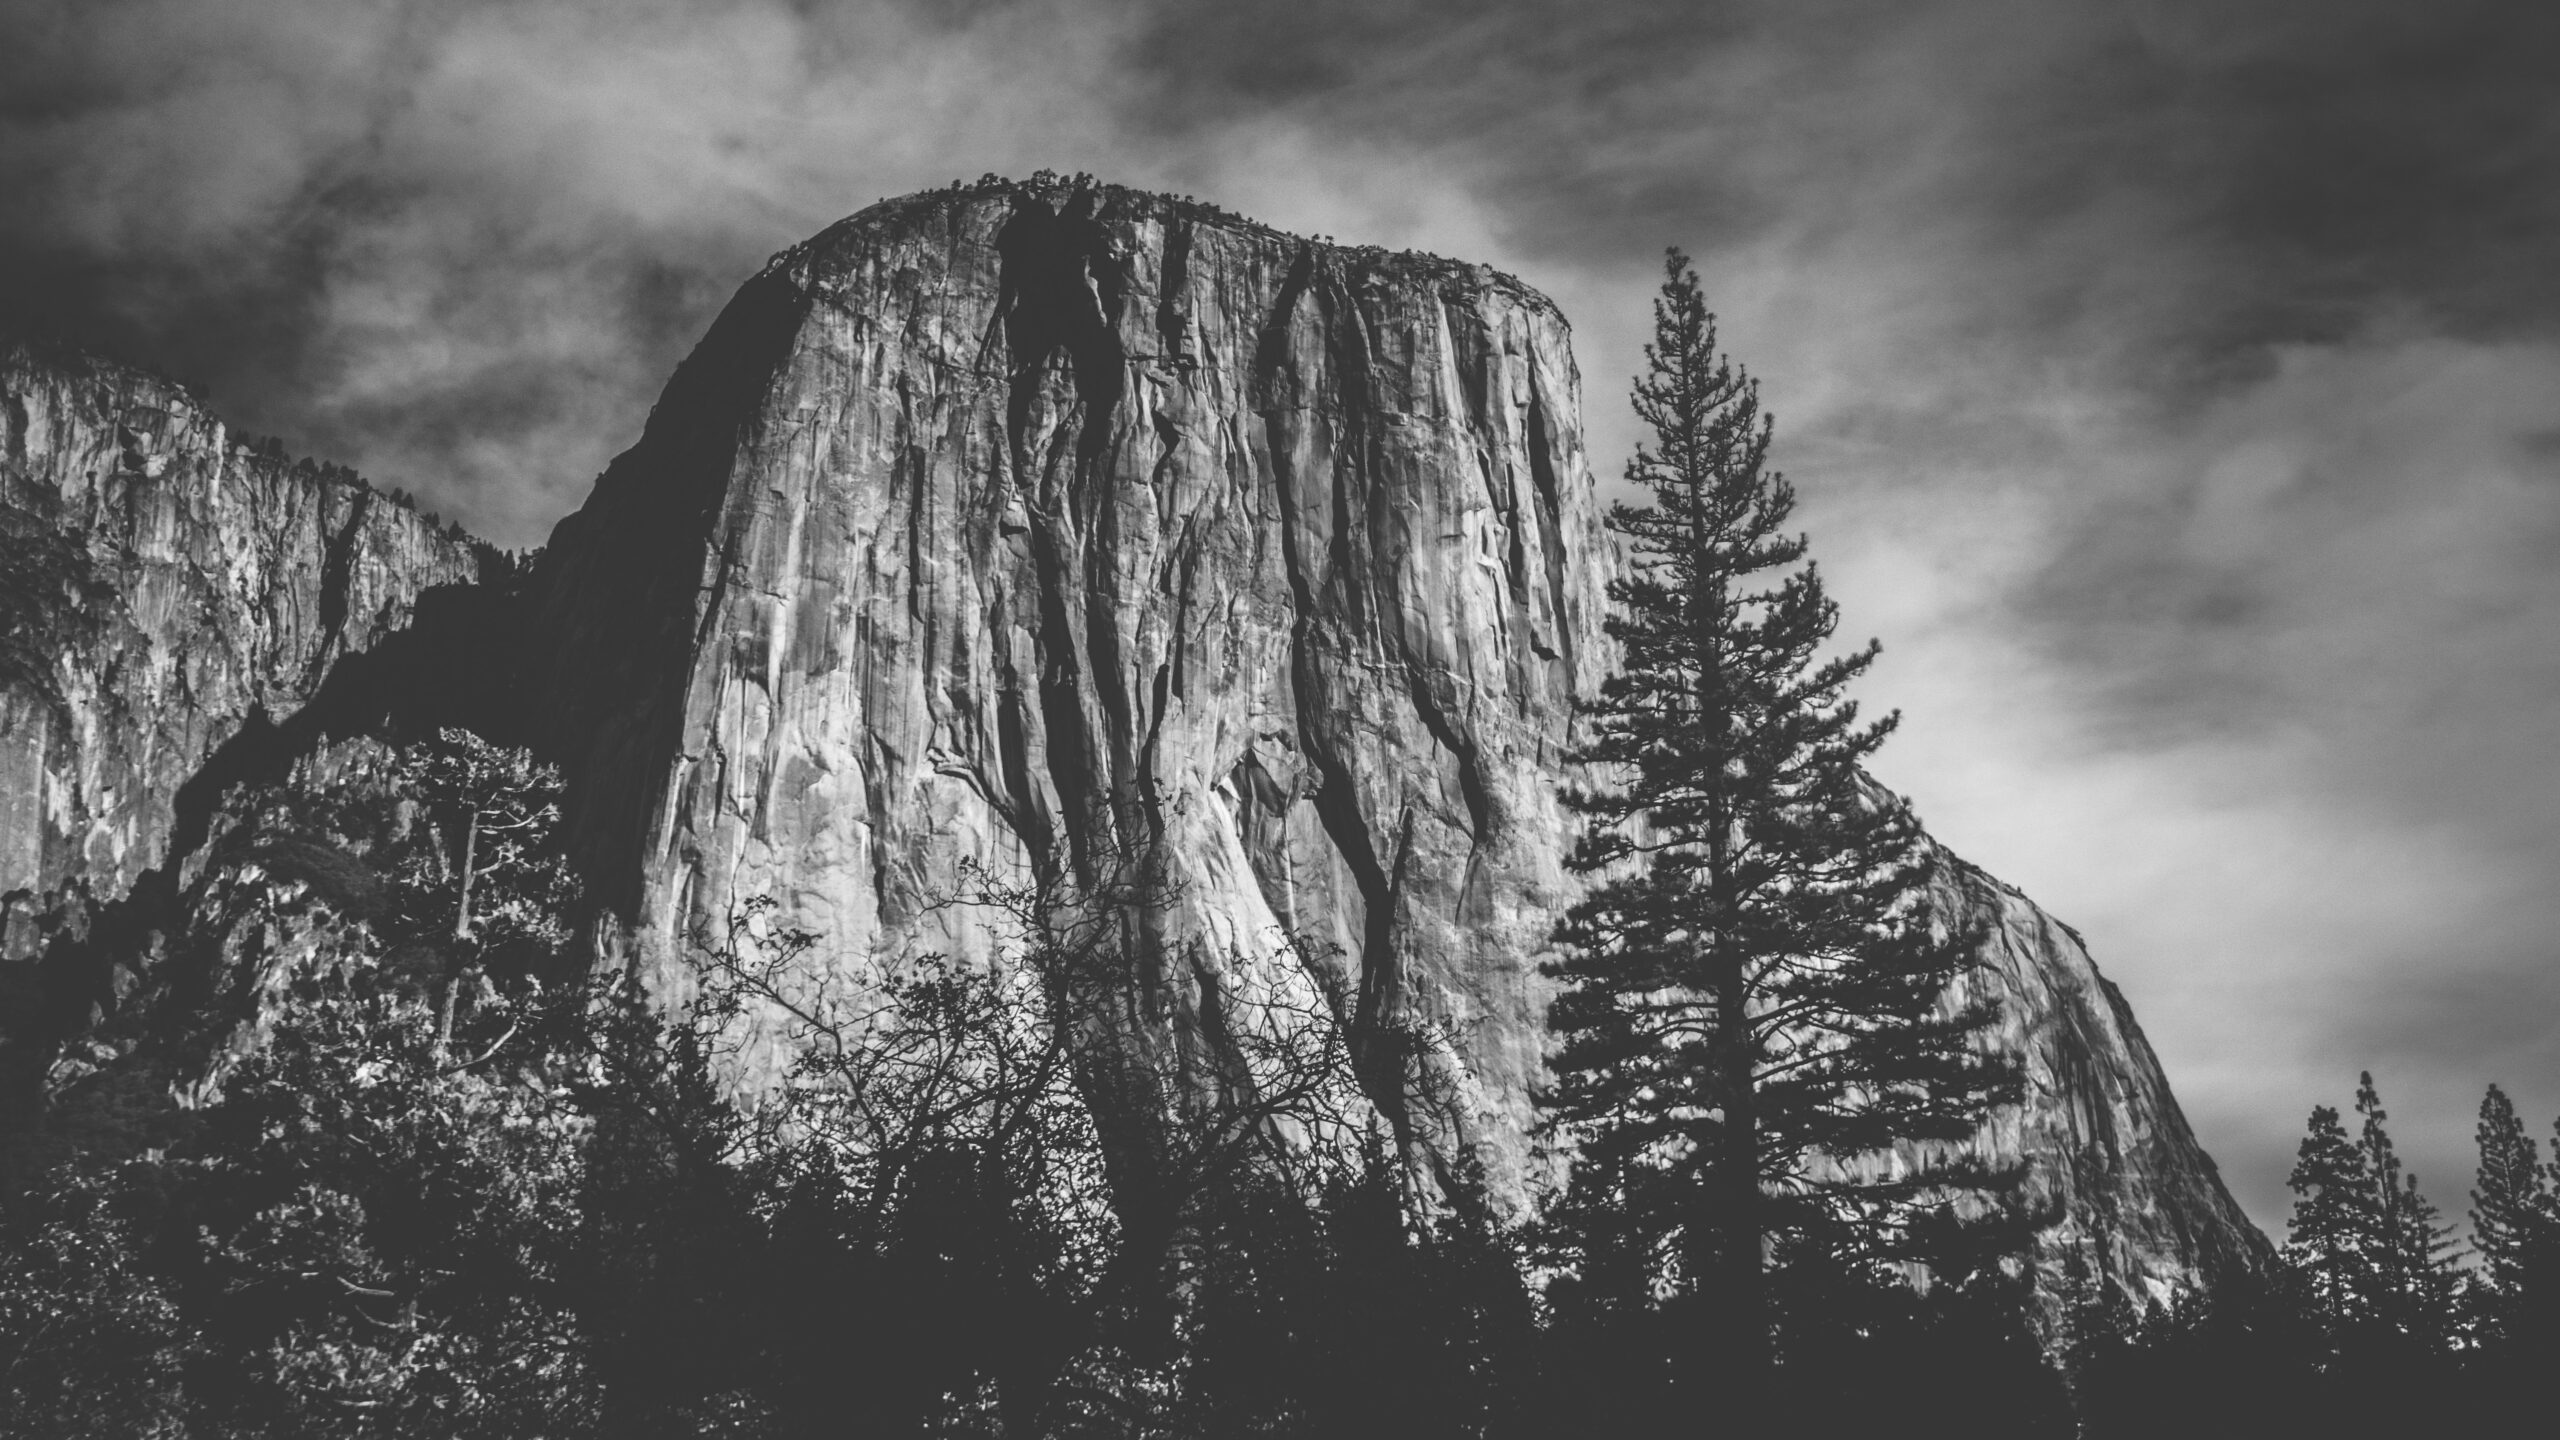 A black and white picture of El Capitan